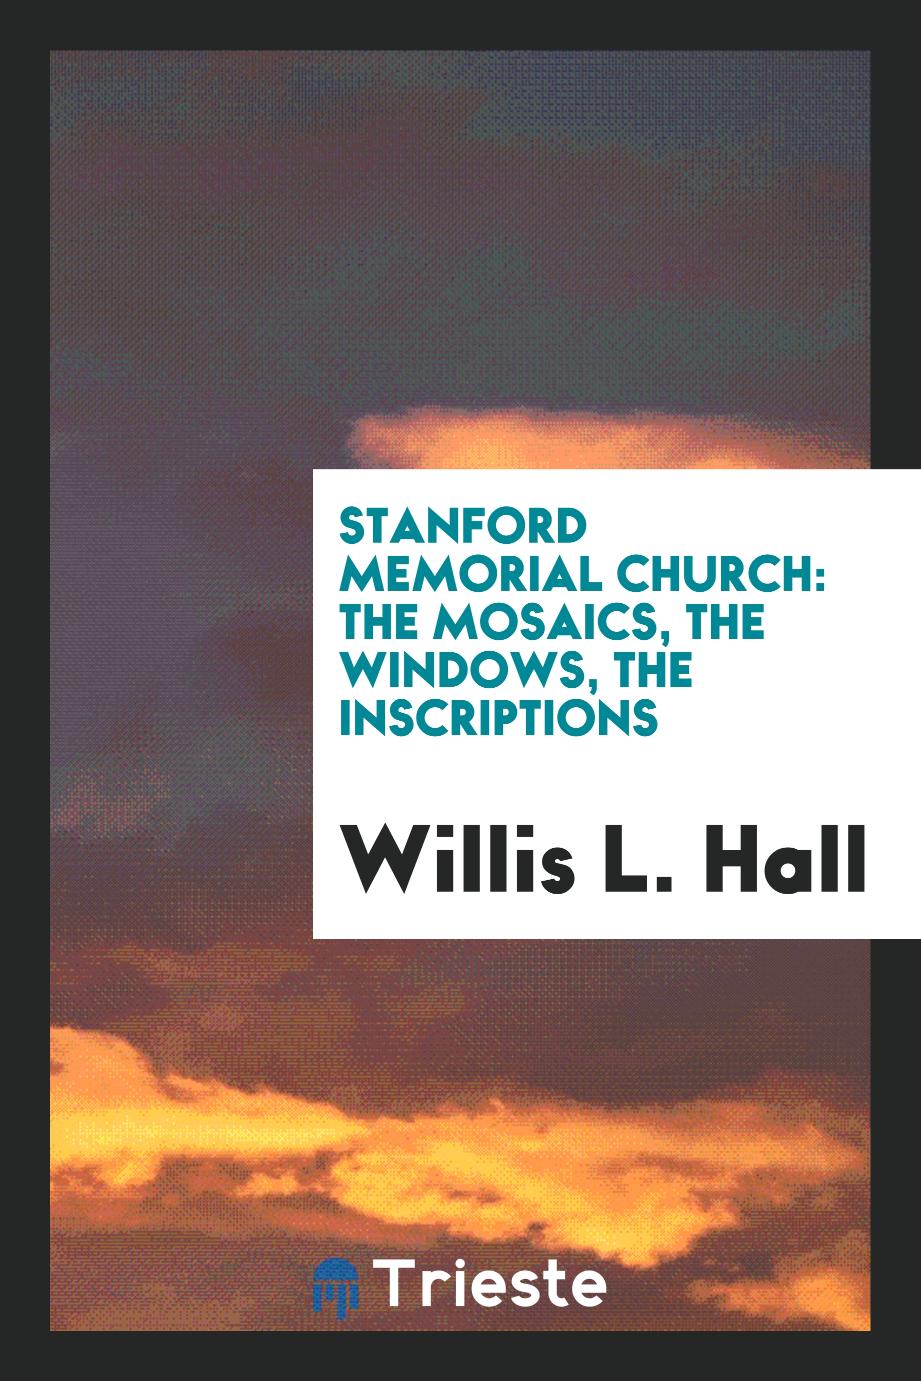 Willis L. Hall - Stanford Memorial Church: The Mosaics, the Windows, the Inscriptions